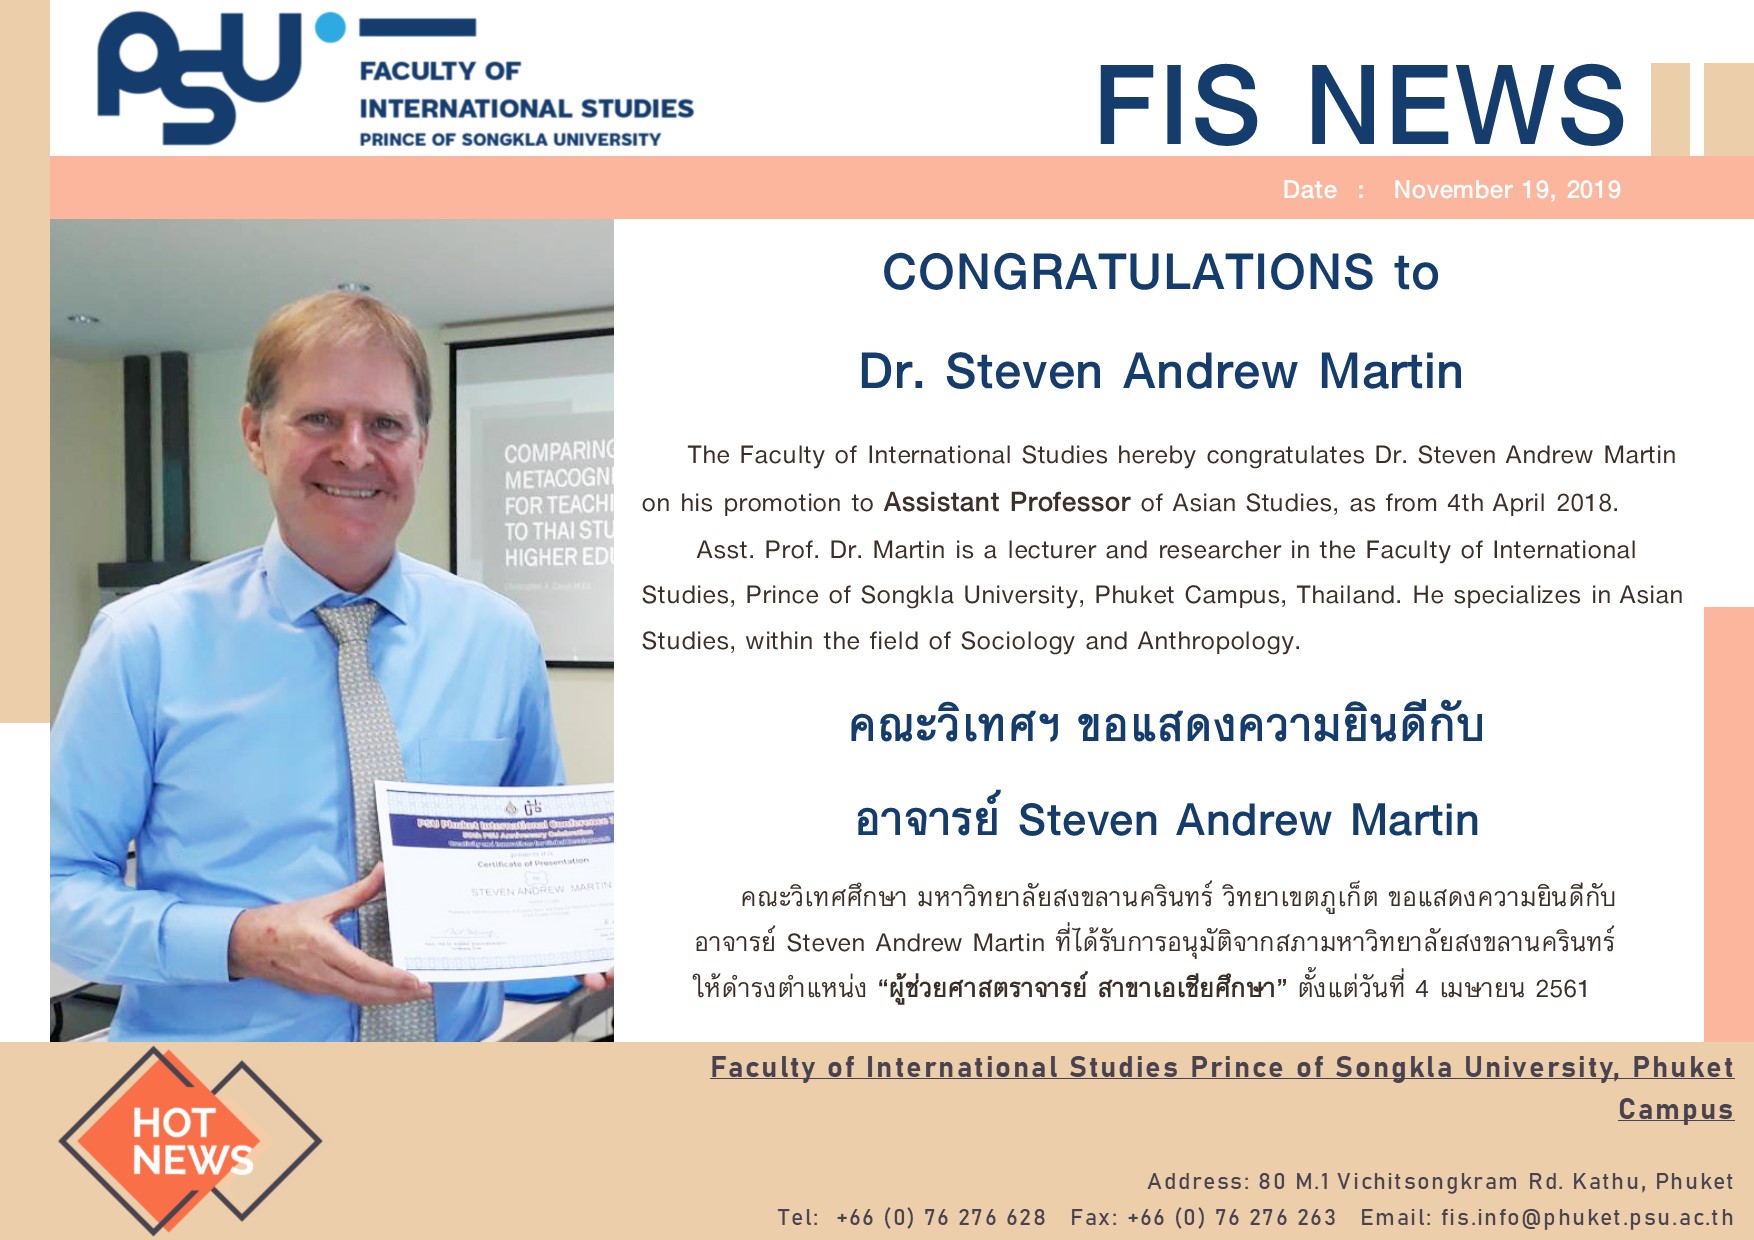 Prince of Songkla University News |  Faculty of International Studies | Congratulation Dr. Steven A Martin on promotion to Assistant Professor of Asian Studies